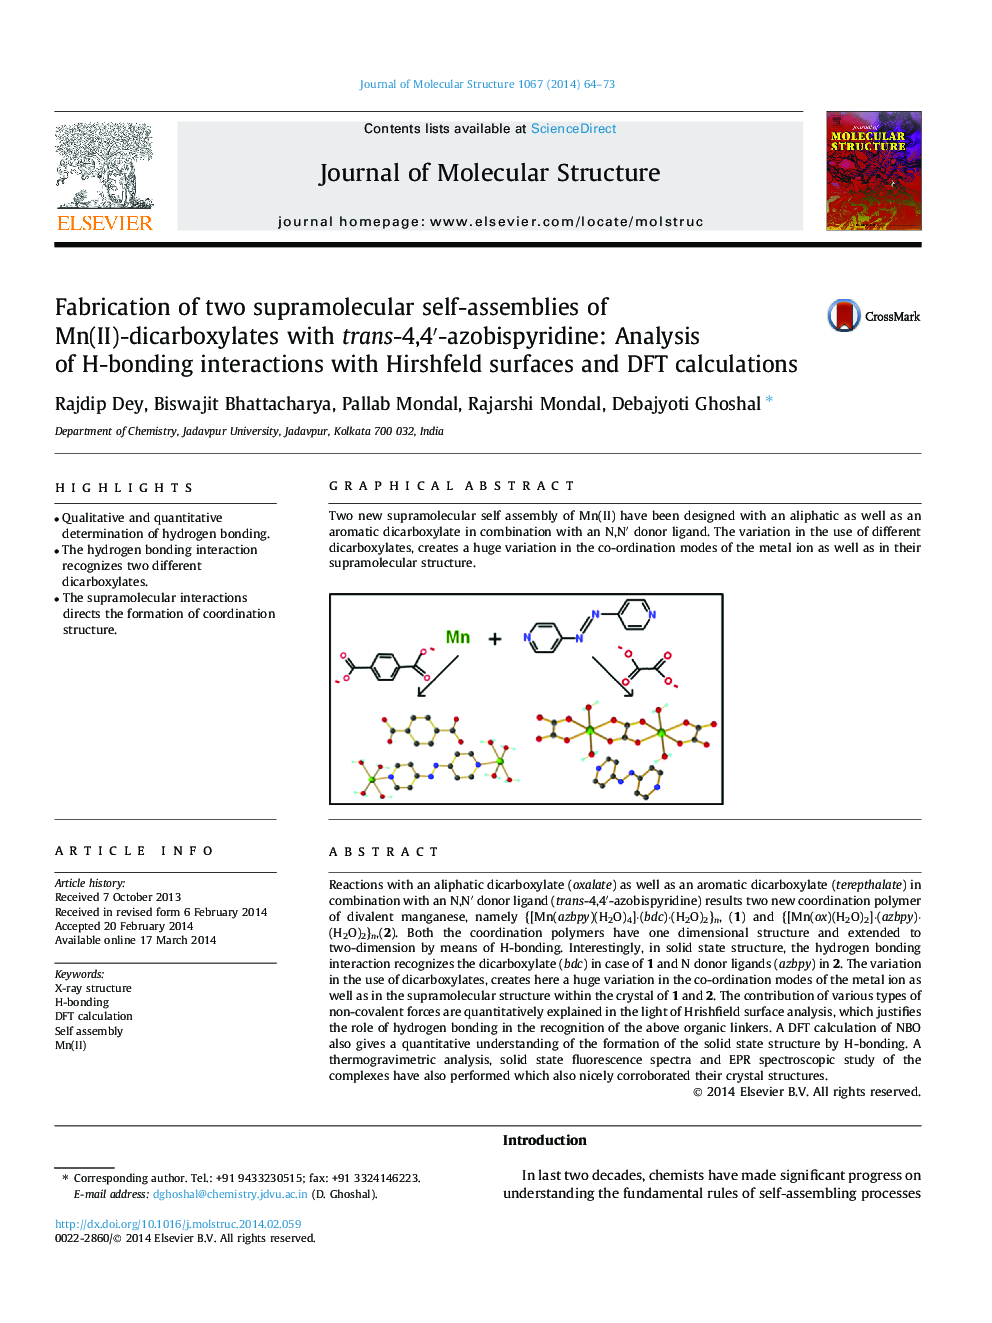 Fabrication of two supramolecular self-assemblies of Mn(II)-dicarboxylates with trans-4,4′-azobispyridine: Analysis of H-bonding interactions with Hirshfeld surfaces and DFT calculations